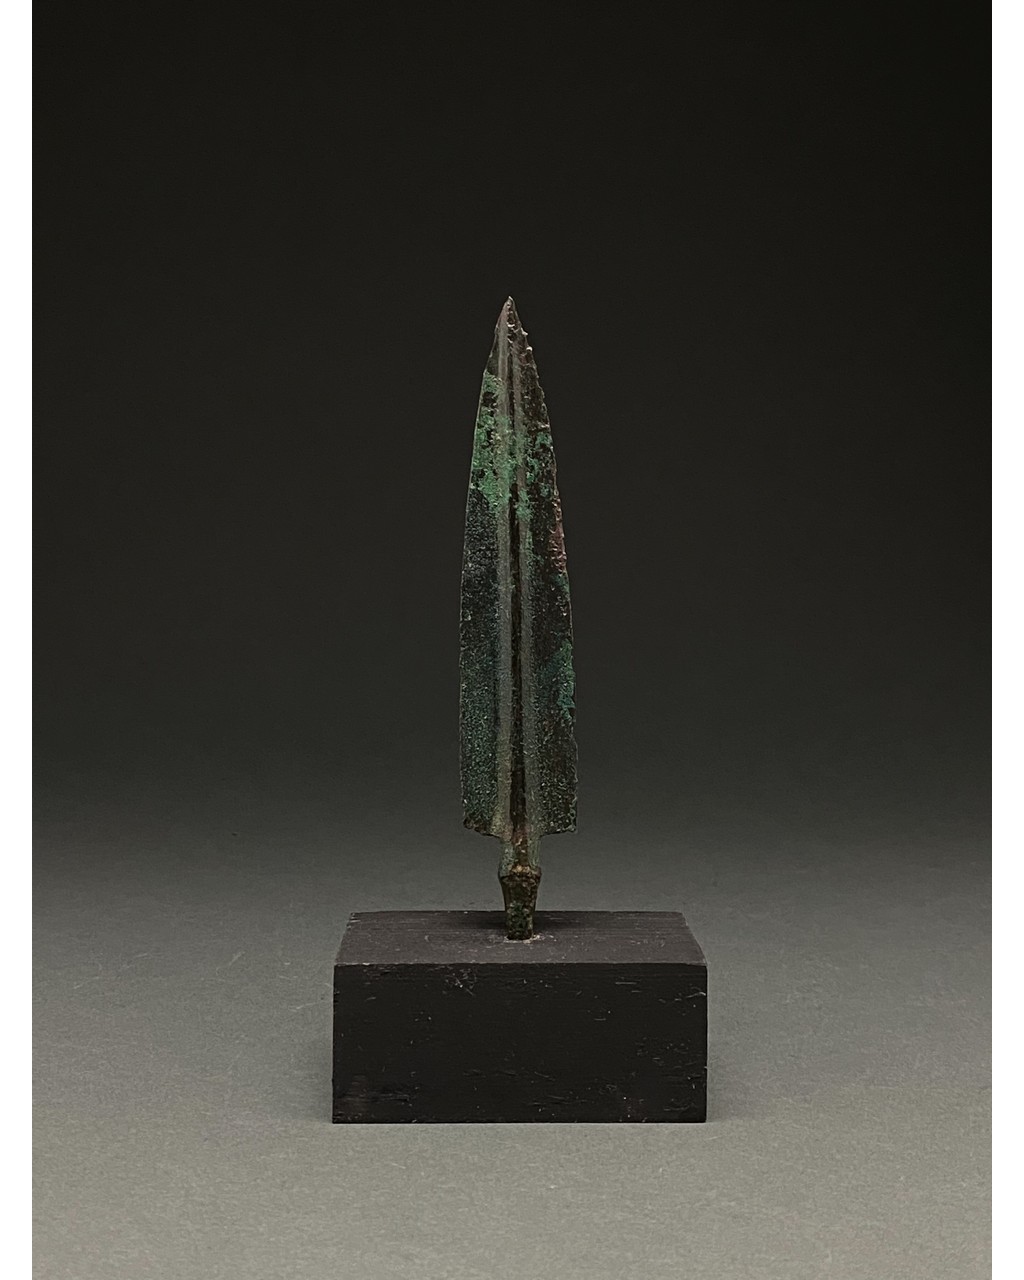 ANCIENT BRONZE SPEAR ON STAND - Image 4 of 4